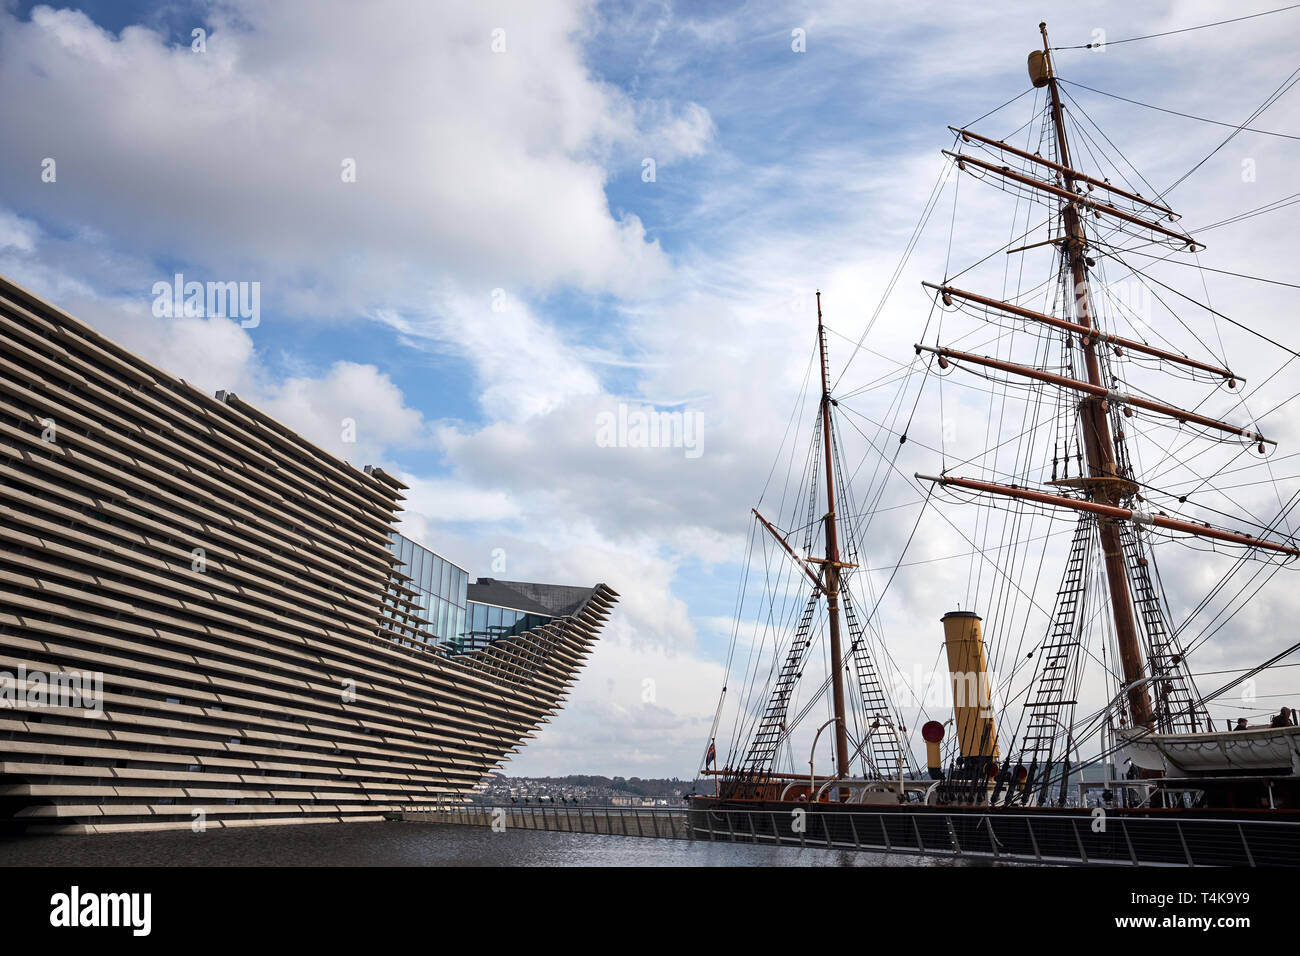 The exterior of the Victoria & Albert Museum in Dundee, Scotland next to the RRS Discovery wooden auxiliary steam ship. Stock Photo